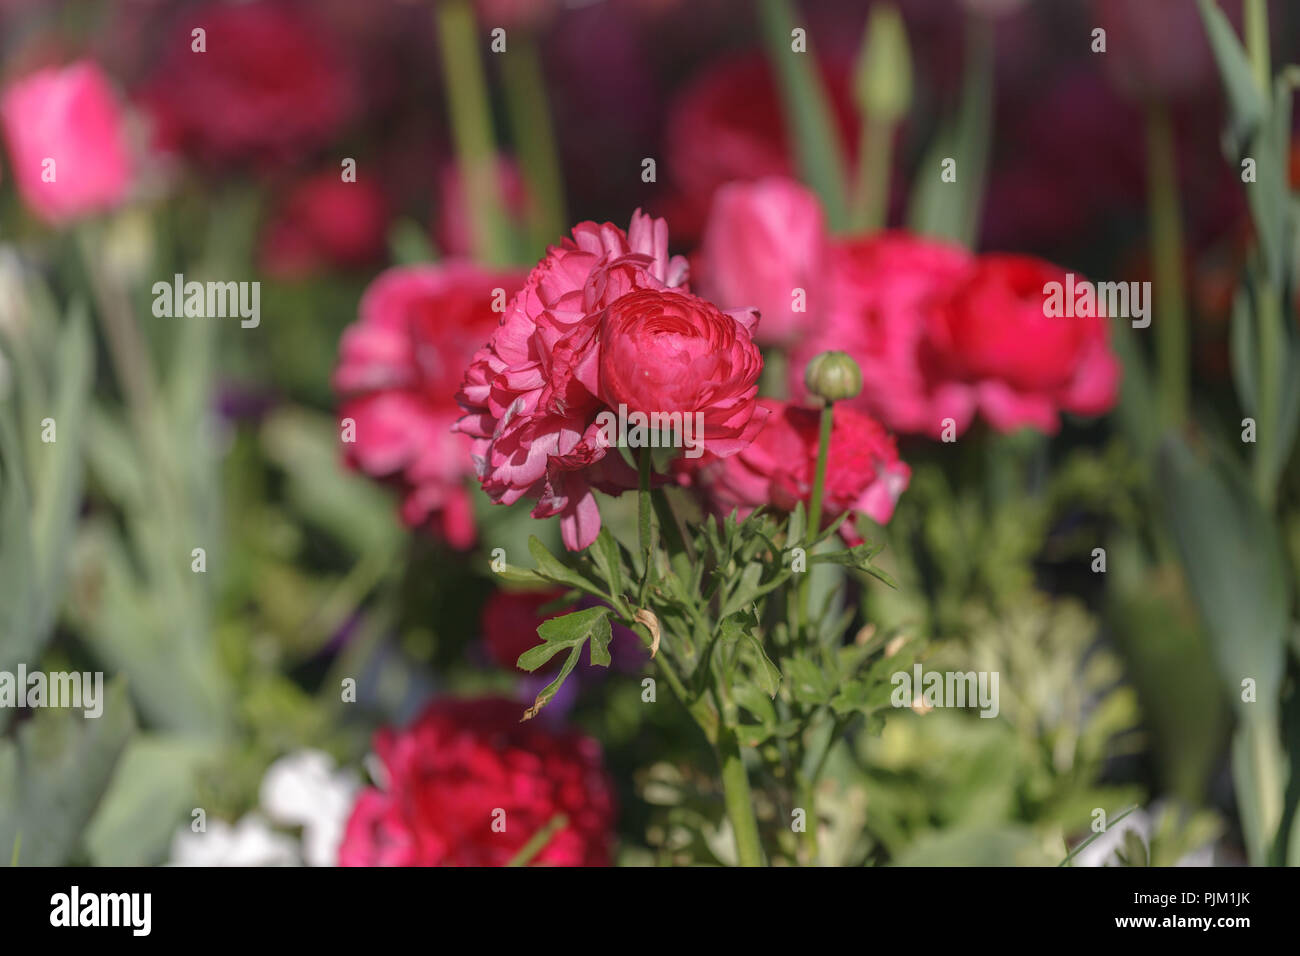 Tulips and ranunculus in a bed, Stock Photo